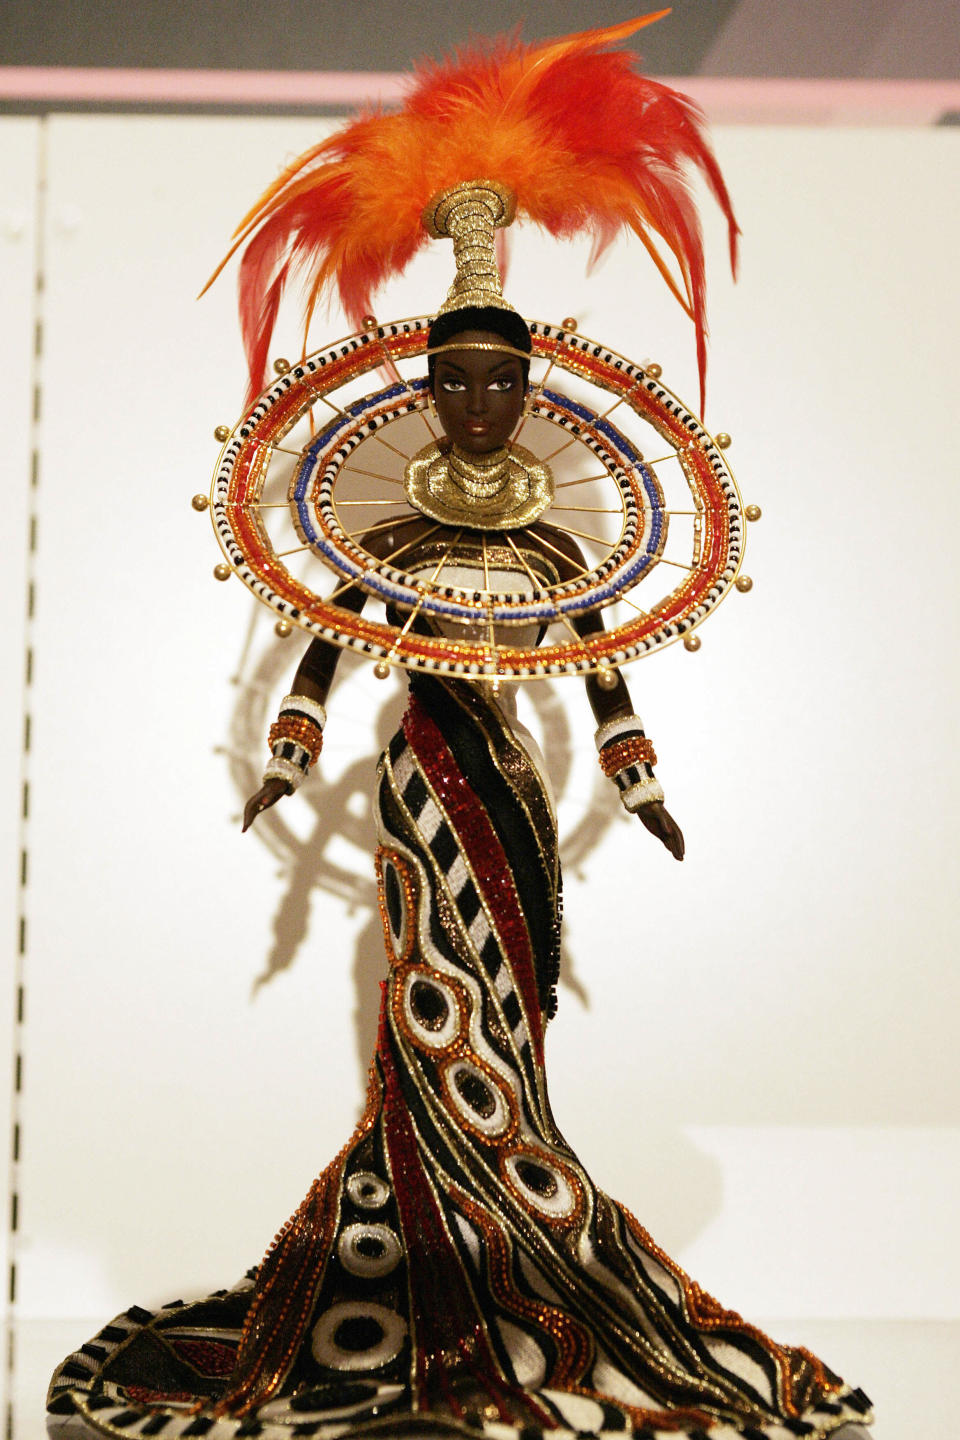 Bob Mackie's Fantasy Goddess of Africa doll, first released in 1999.